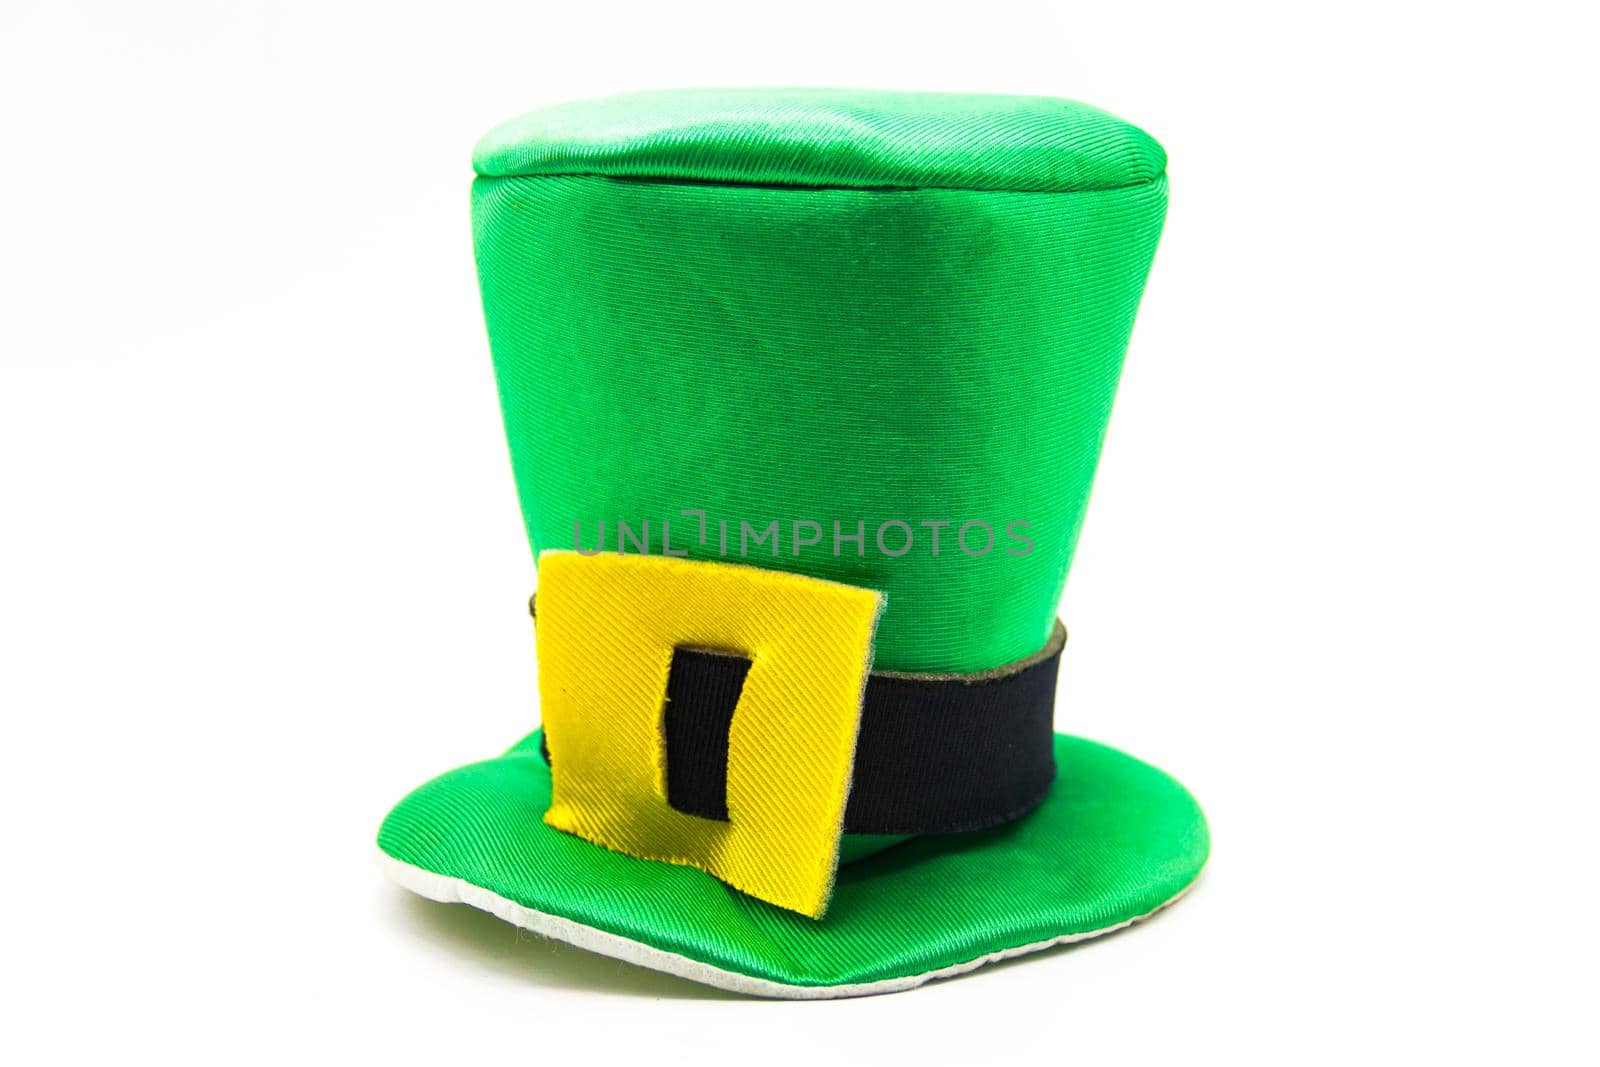 green hat on white background, st patricks day concept by GabrielaBertolini